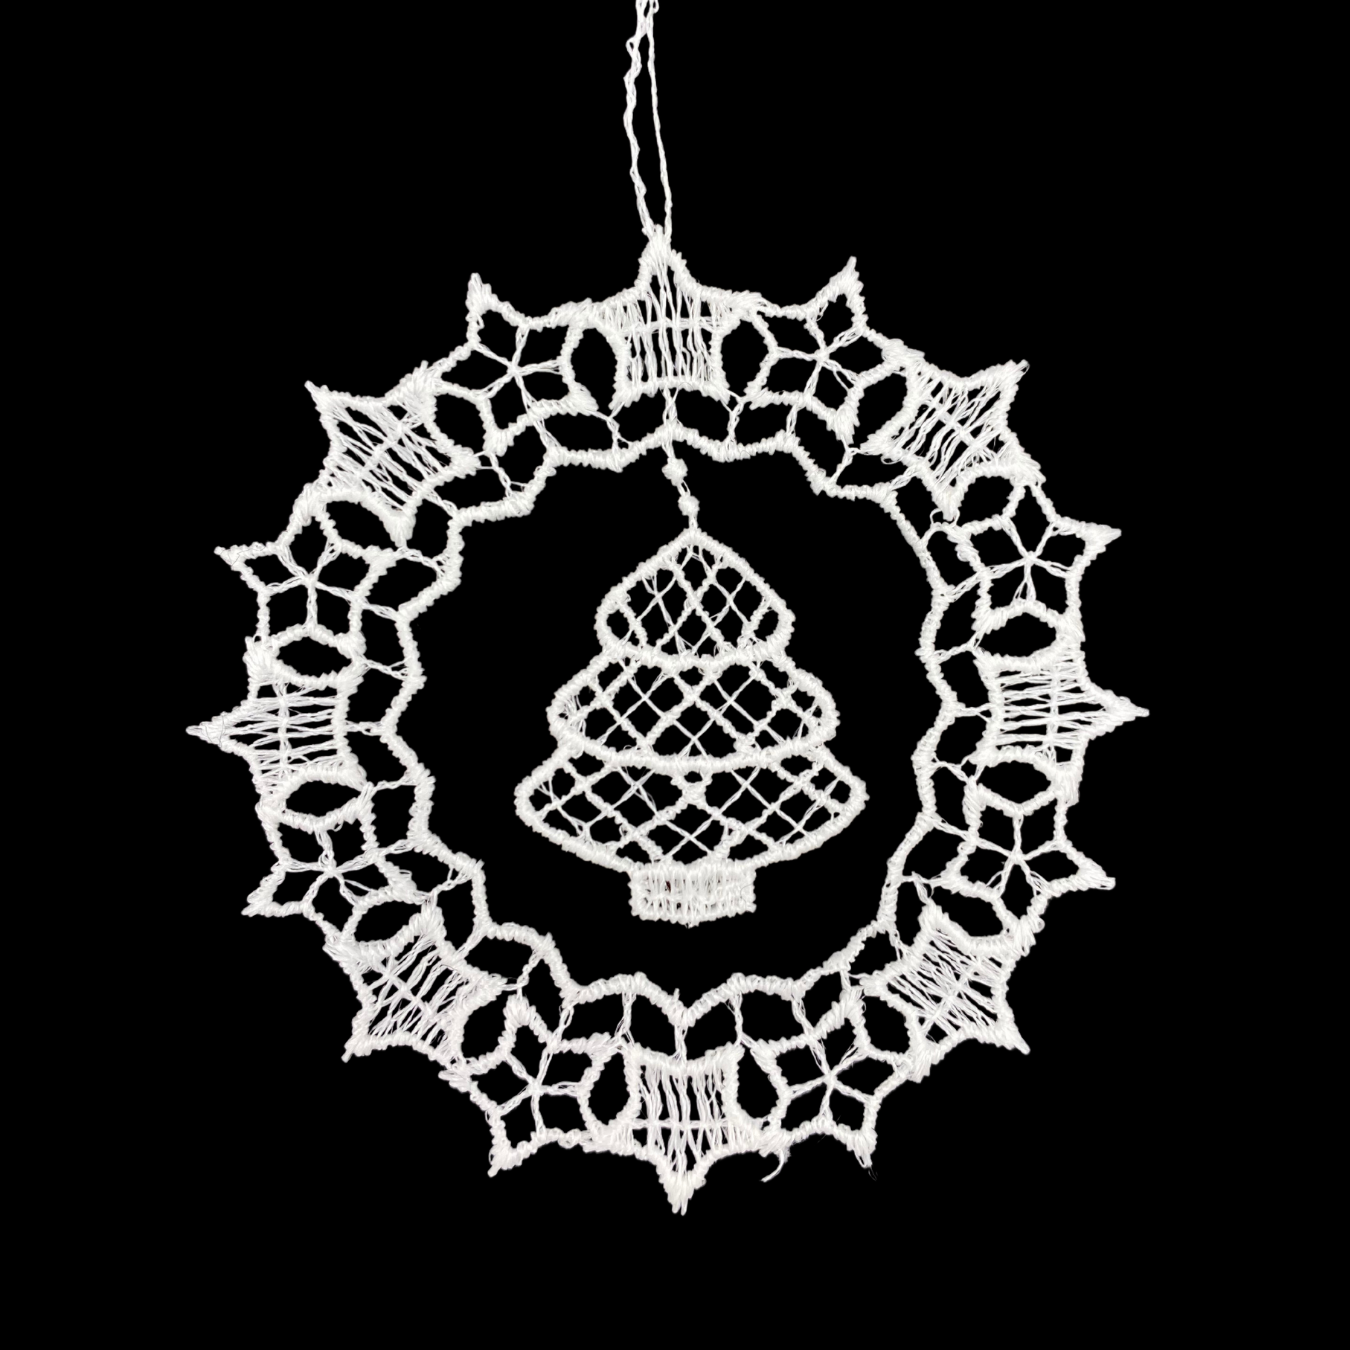 Lace Ball with Tree Ornament by StiVoTexVogel